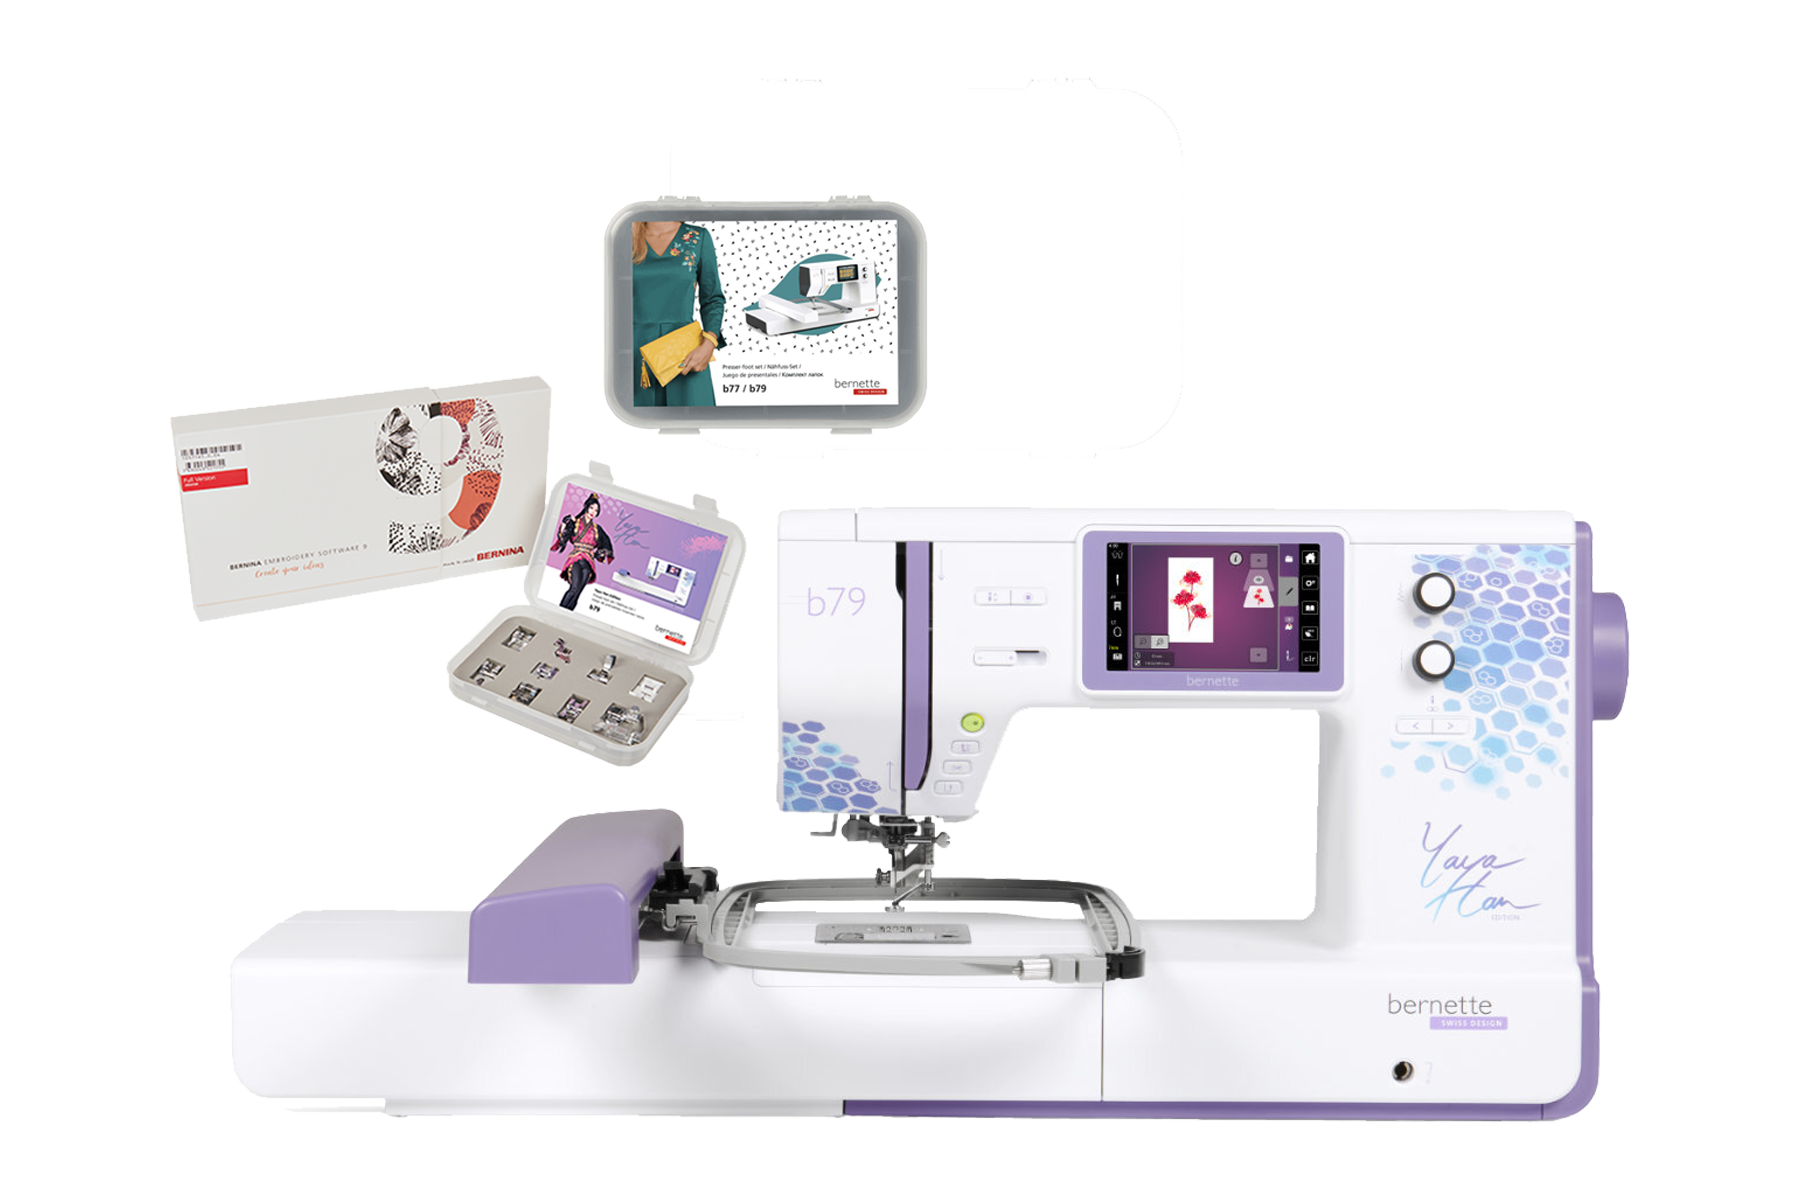 Bernette b79 Yaya Han Special Edition Sewing and Embroidery Machine 10x6